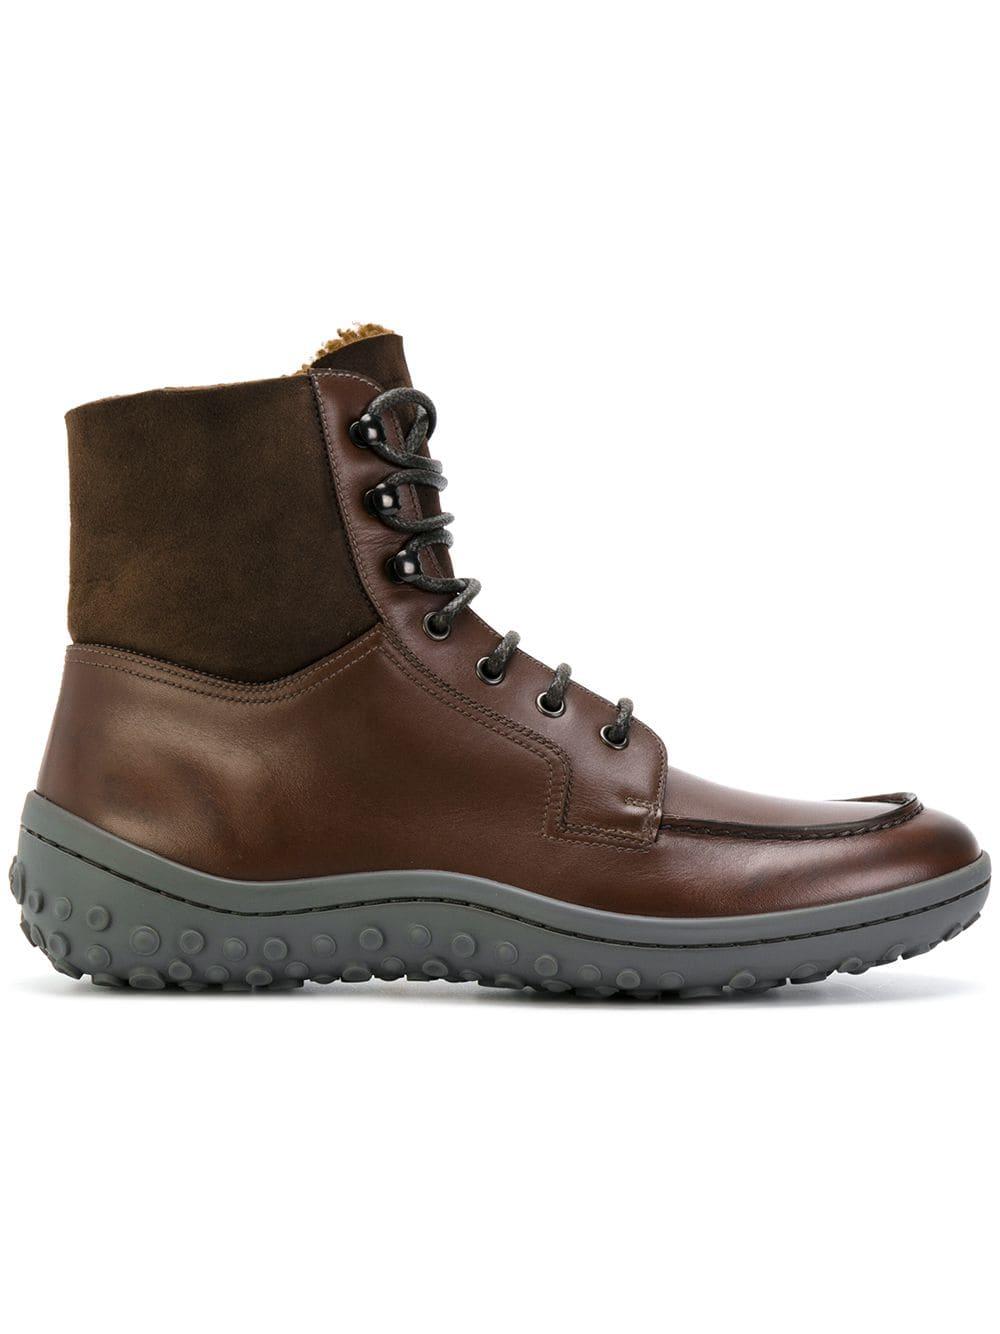 Car Shoe Leather Shearling Boots in Brown for Men - Lyst